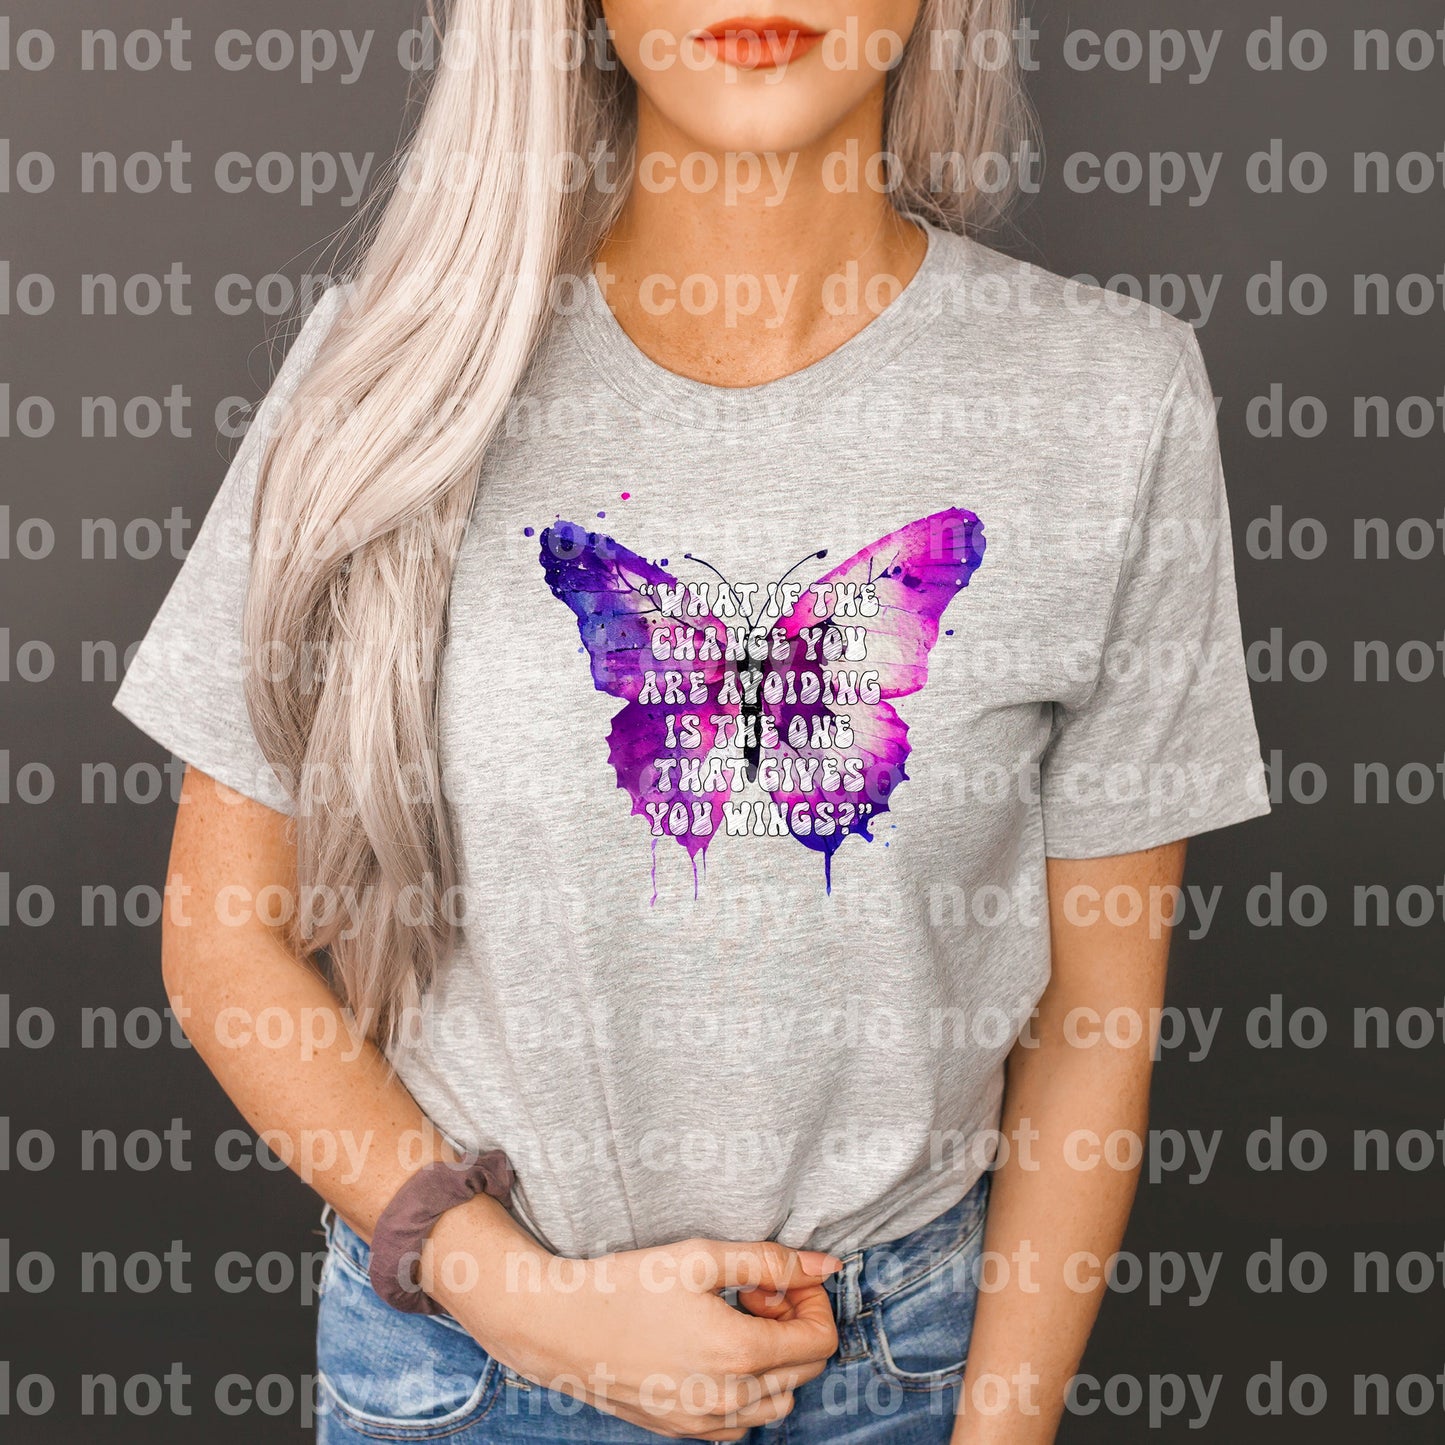 What If The Change You Are Avoiding Is The One That Gives You Wings Dream Print or Sublimation Print